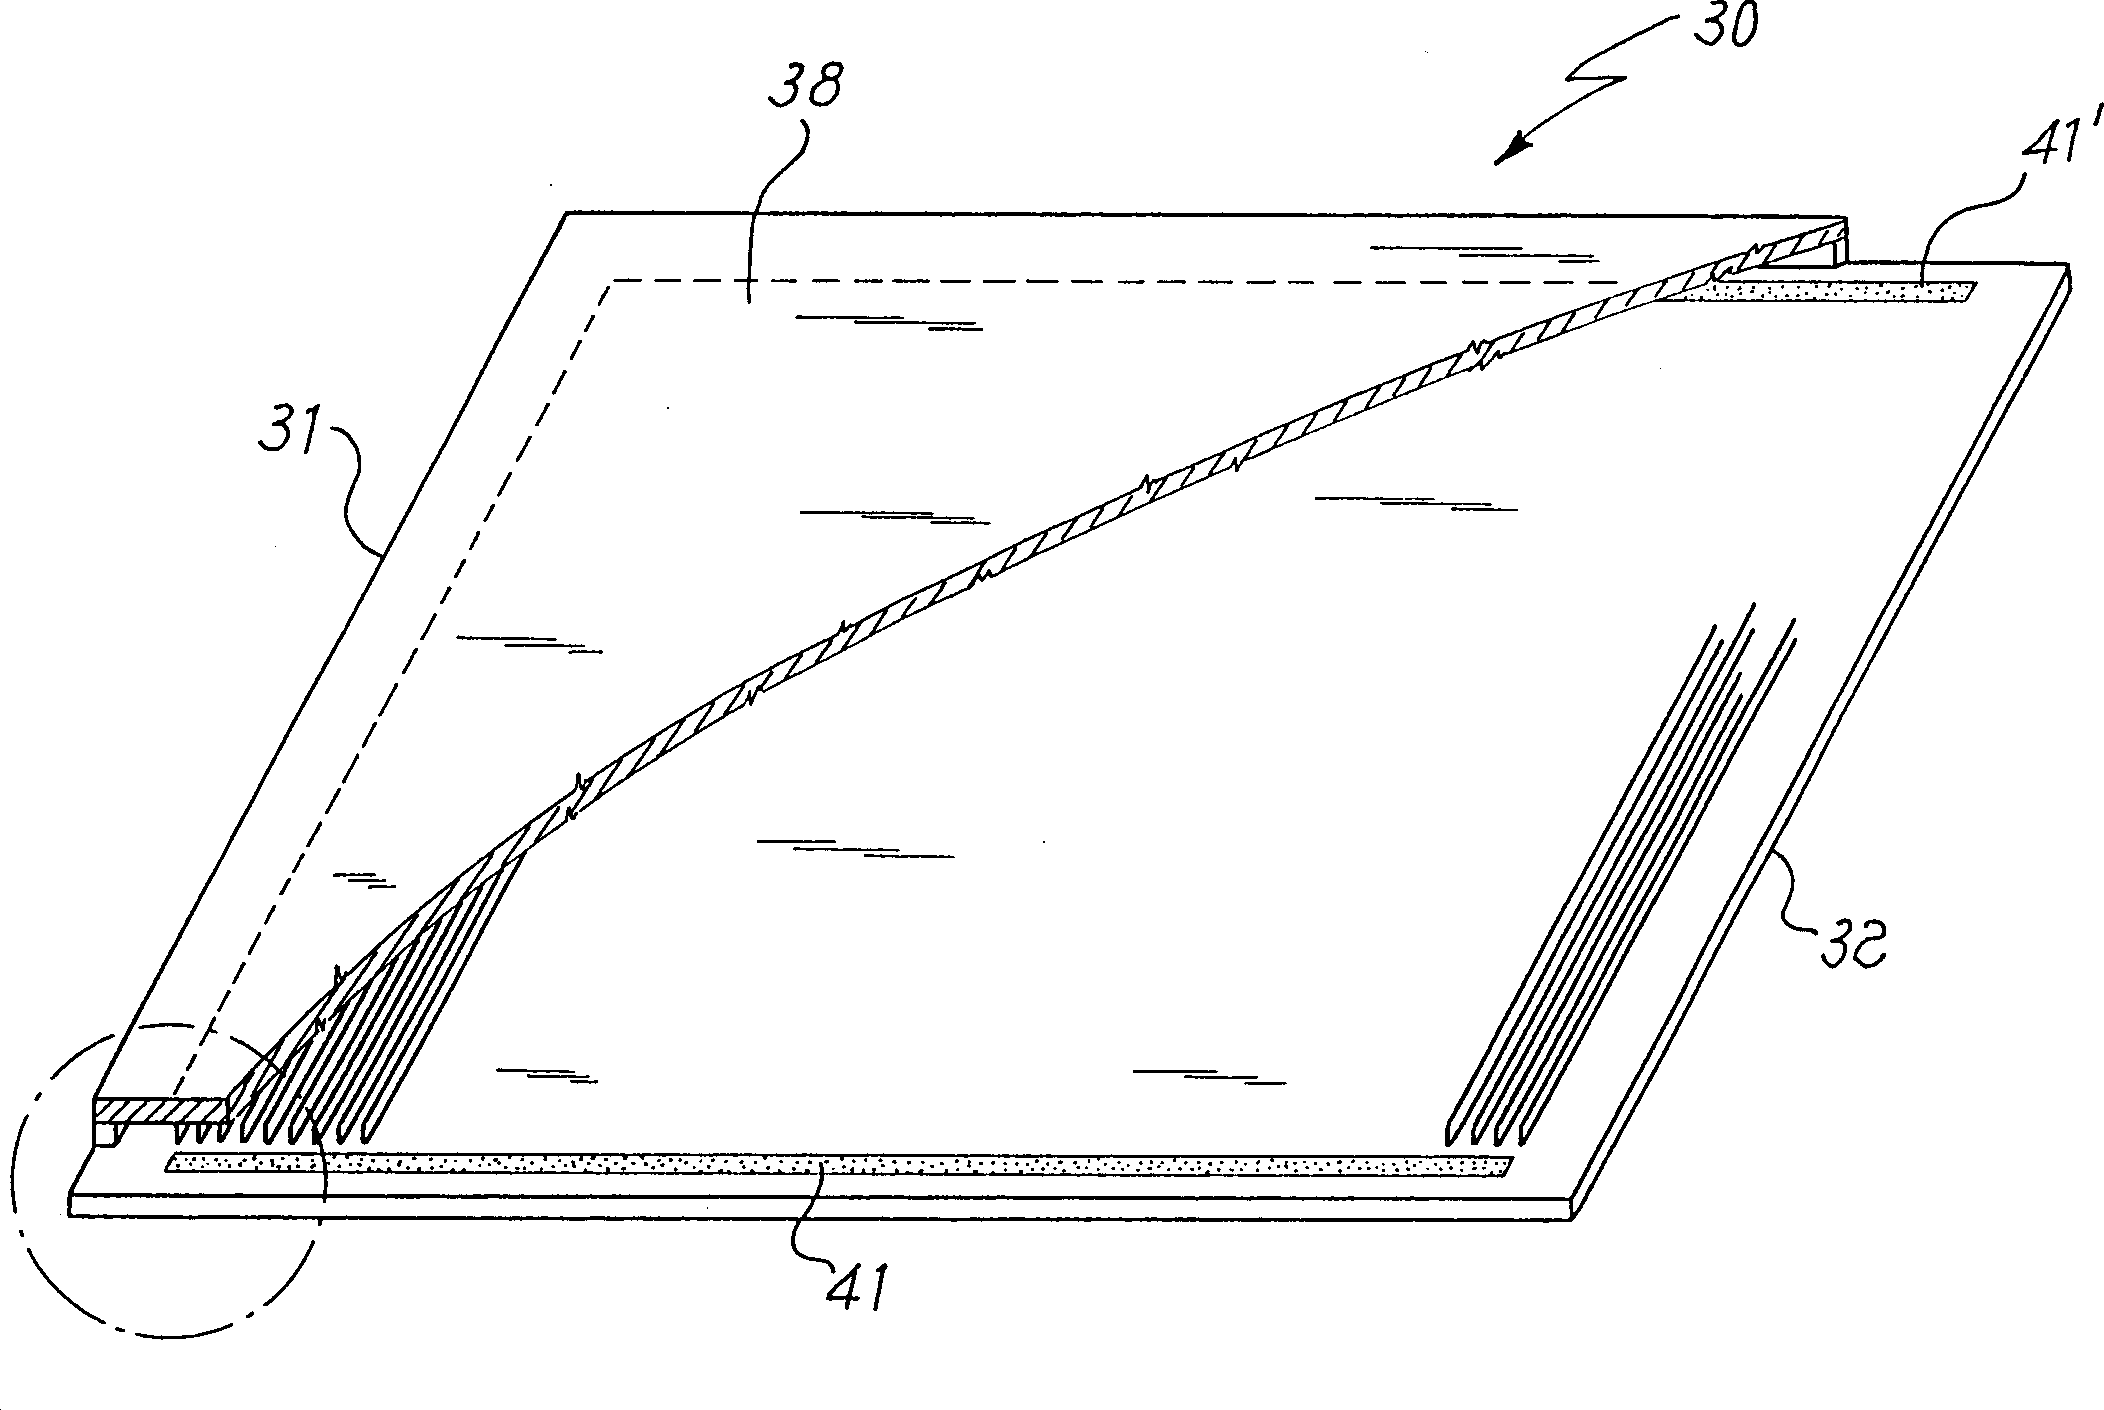 Getter system in plasma plane-plate used as screen